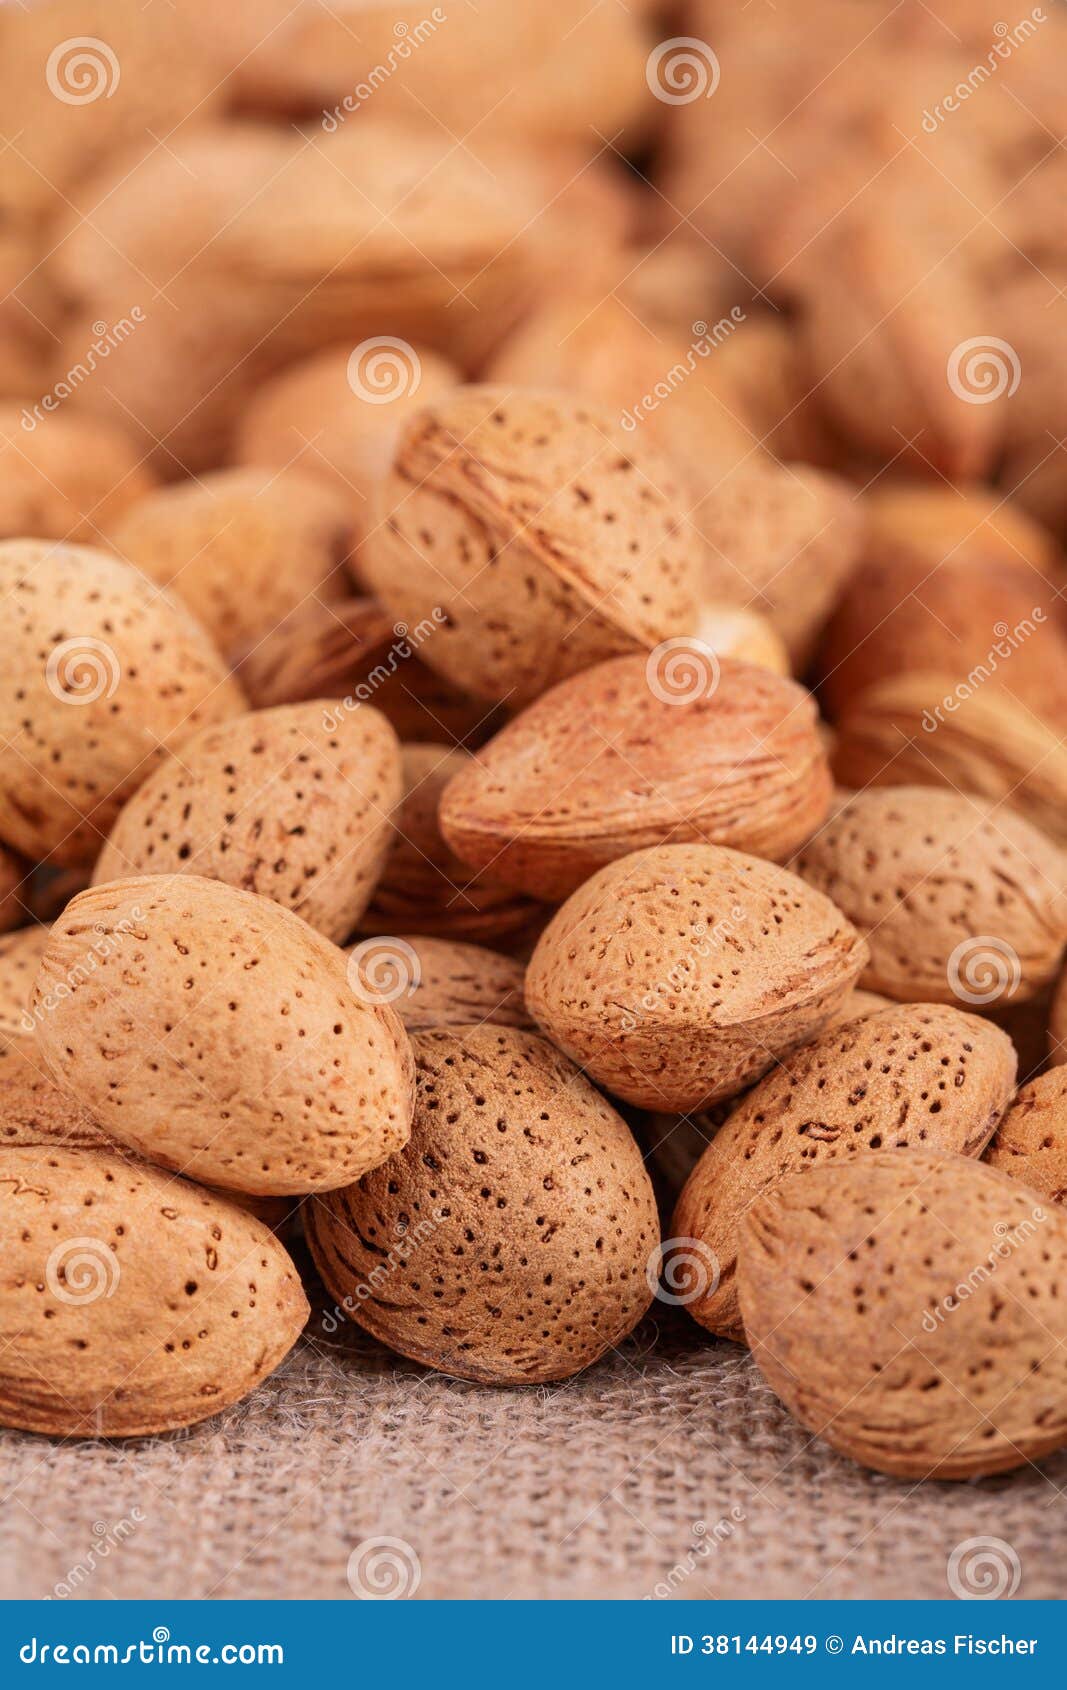 Royalty Free Stock Images: Almonds nuts